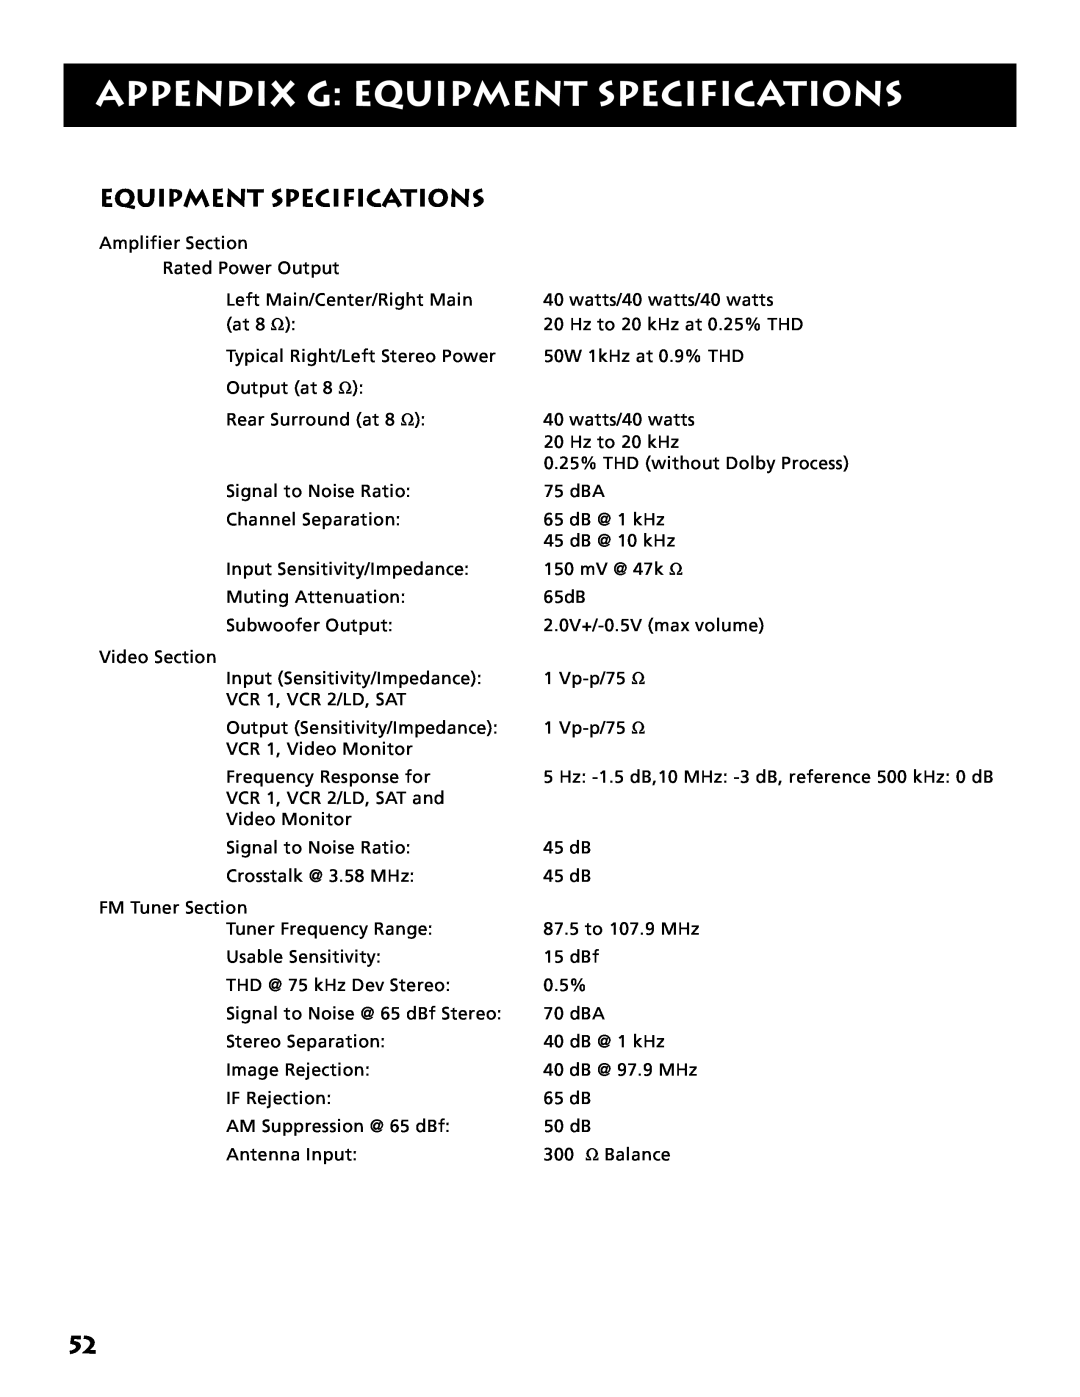 Electrohome RV-3798 manual Appendix G: Equipment Specifications 